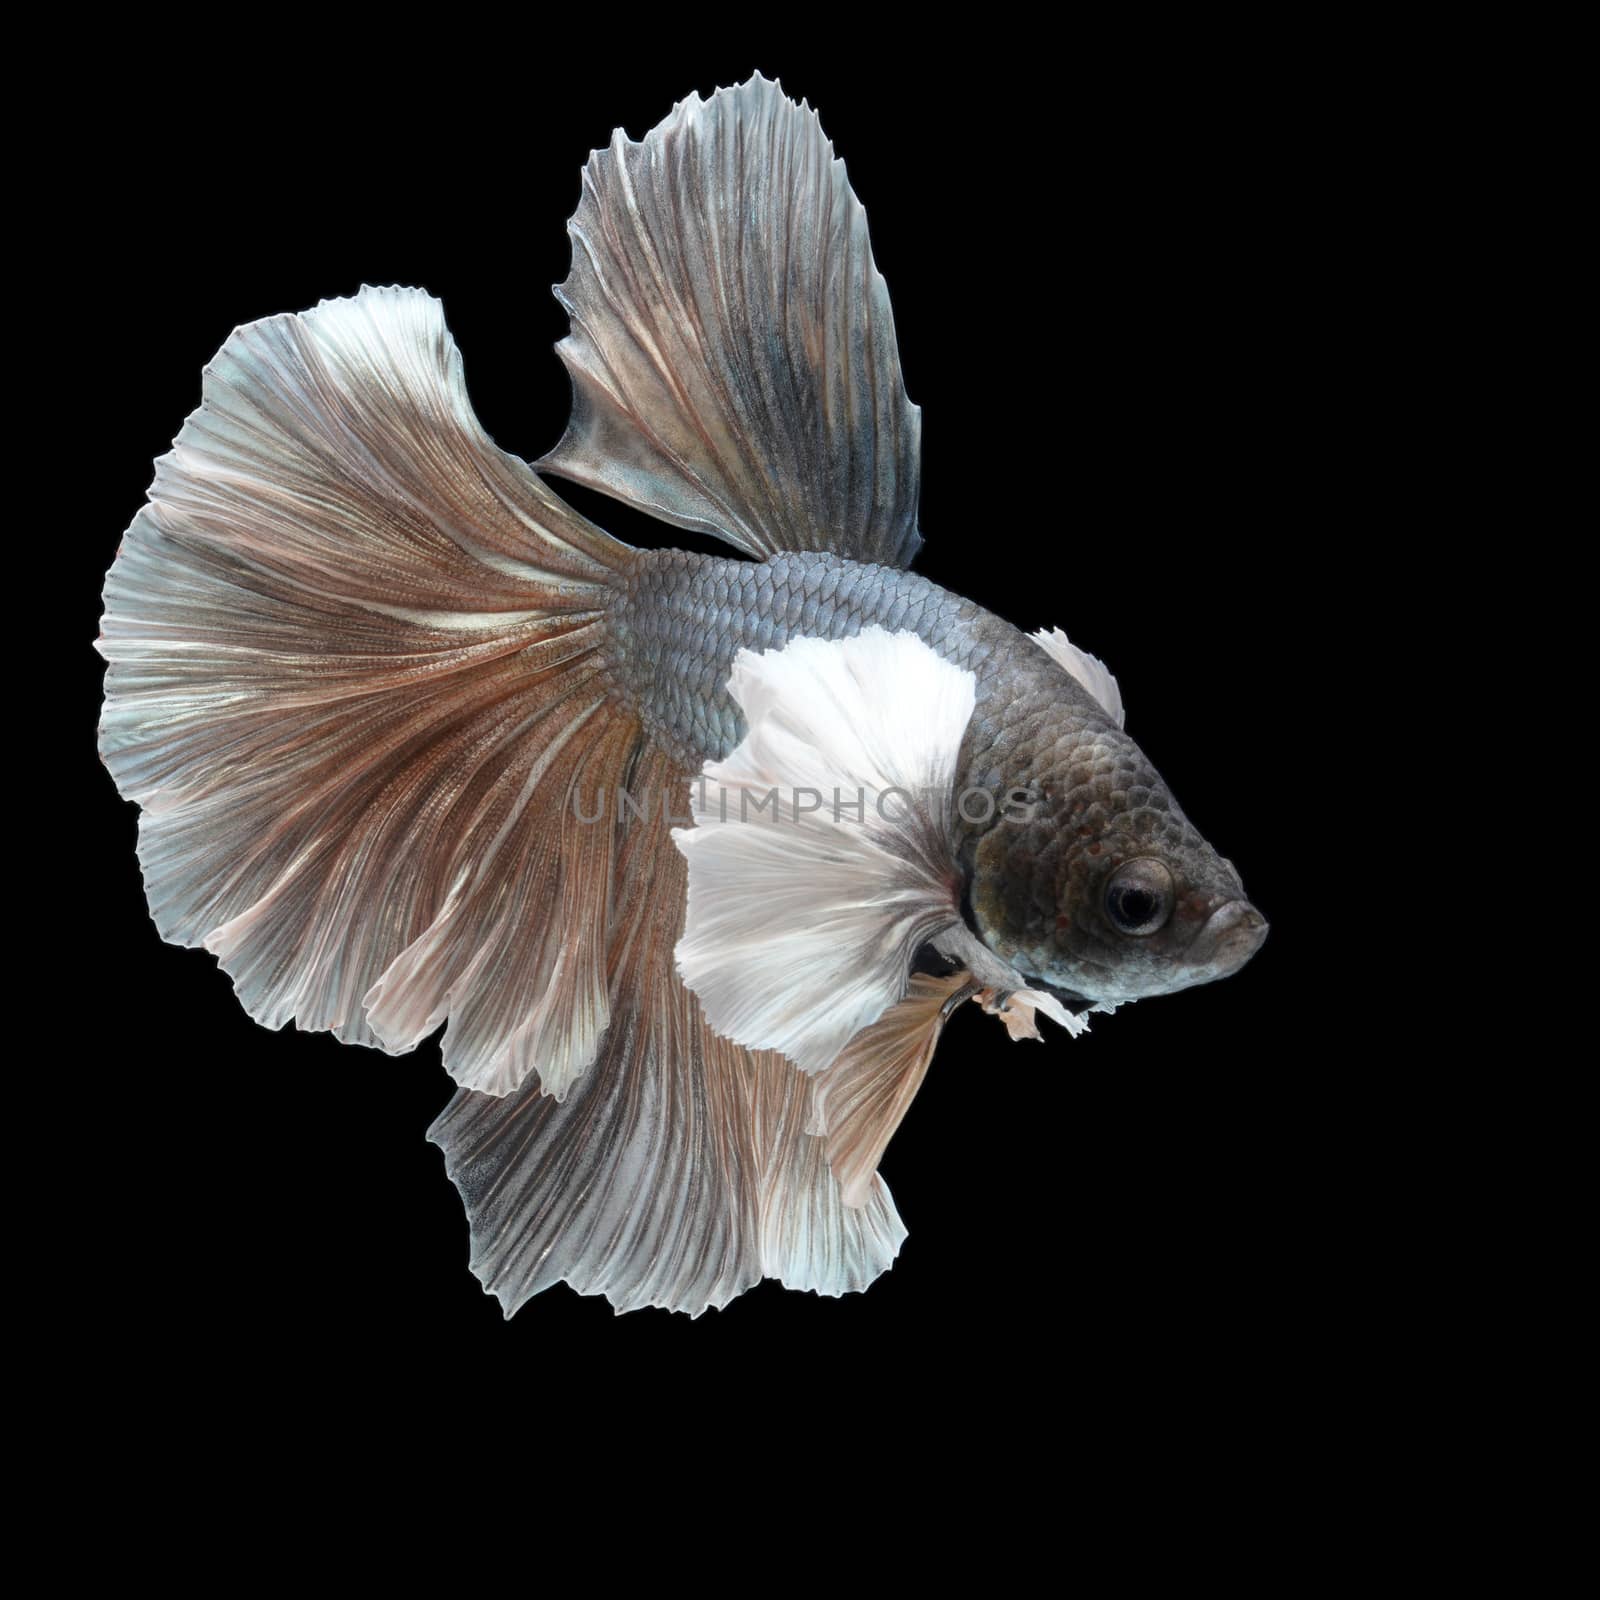 Aggressive male halfmoon betta on black background. Siamese fighting fish is the freshwater fish with beautiful fins and color.